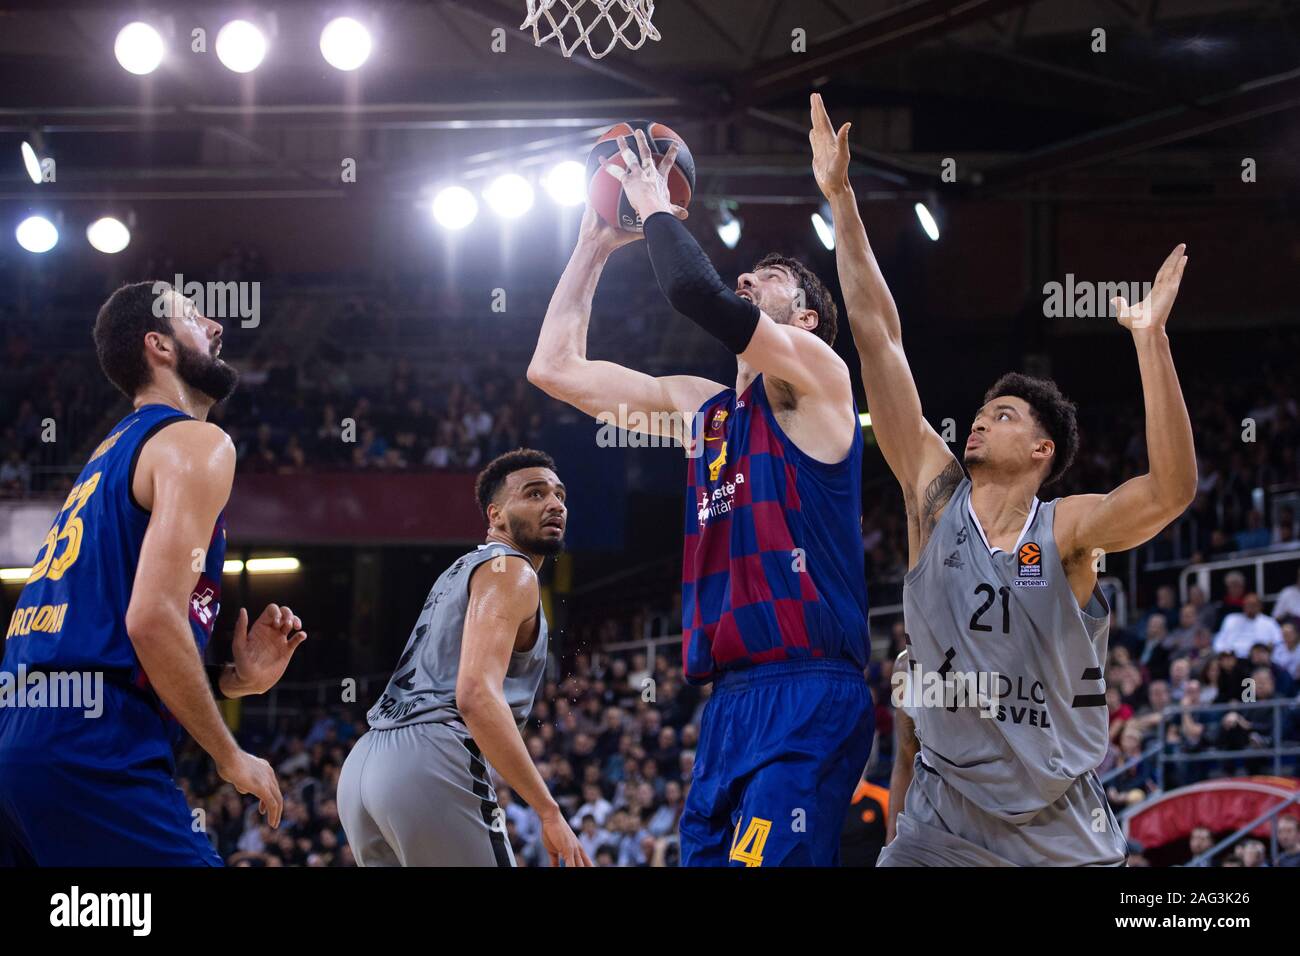 44 Ante Tomic of Barcelona (C), attempts a shot over 21 Ismael Bako of ASVEL (R), during the Euroleague Basketball match between Barcelona and ASVEL (L) at the Camp Nou Stadium, Barcelona, Spain, on December 17th, 2019. FLORENCIA TAN JUN/ESPA), attempts a shot over 21 Ismael Bako of ASVEL (R), 12Amine Noua of ASVEL, (during the Euroleague Basketball match between Barcelona and ASVEL at the Camp Nou Stadium, Barcelona, Spain, on December 17th, 2019. FLORENCIA TAN JUN/ESPA Stock Photo